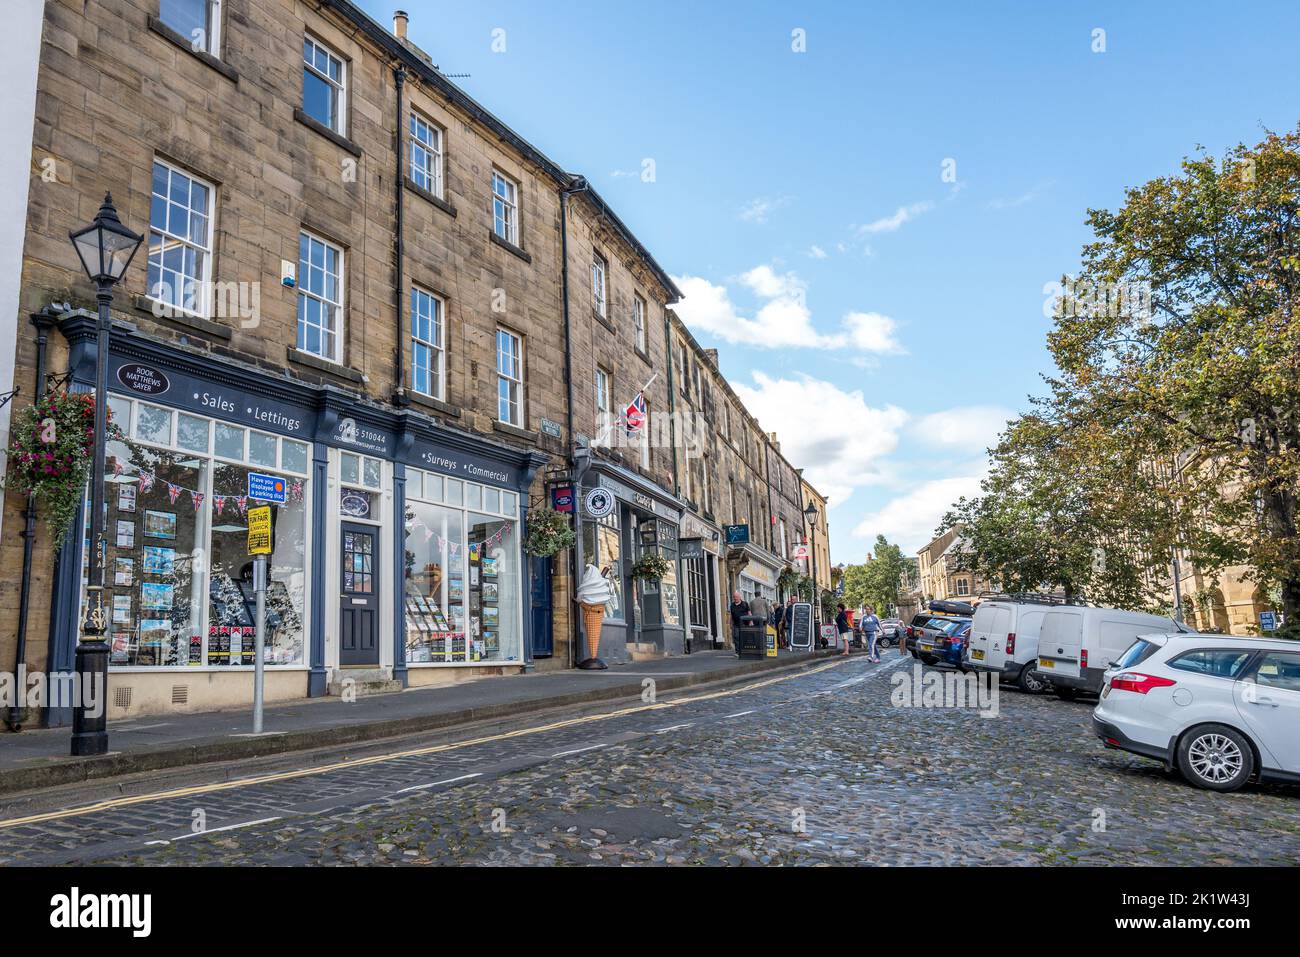 Bondgate within, the main shopping and business road in the centre of the market town of Alnwick, Northumberland, England, UK Stock Photo